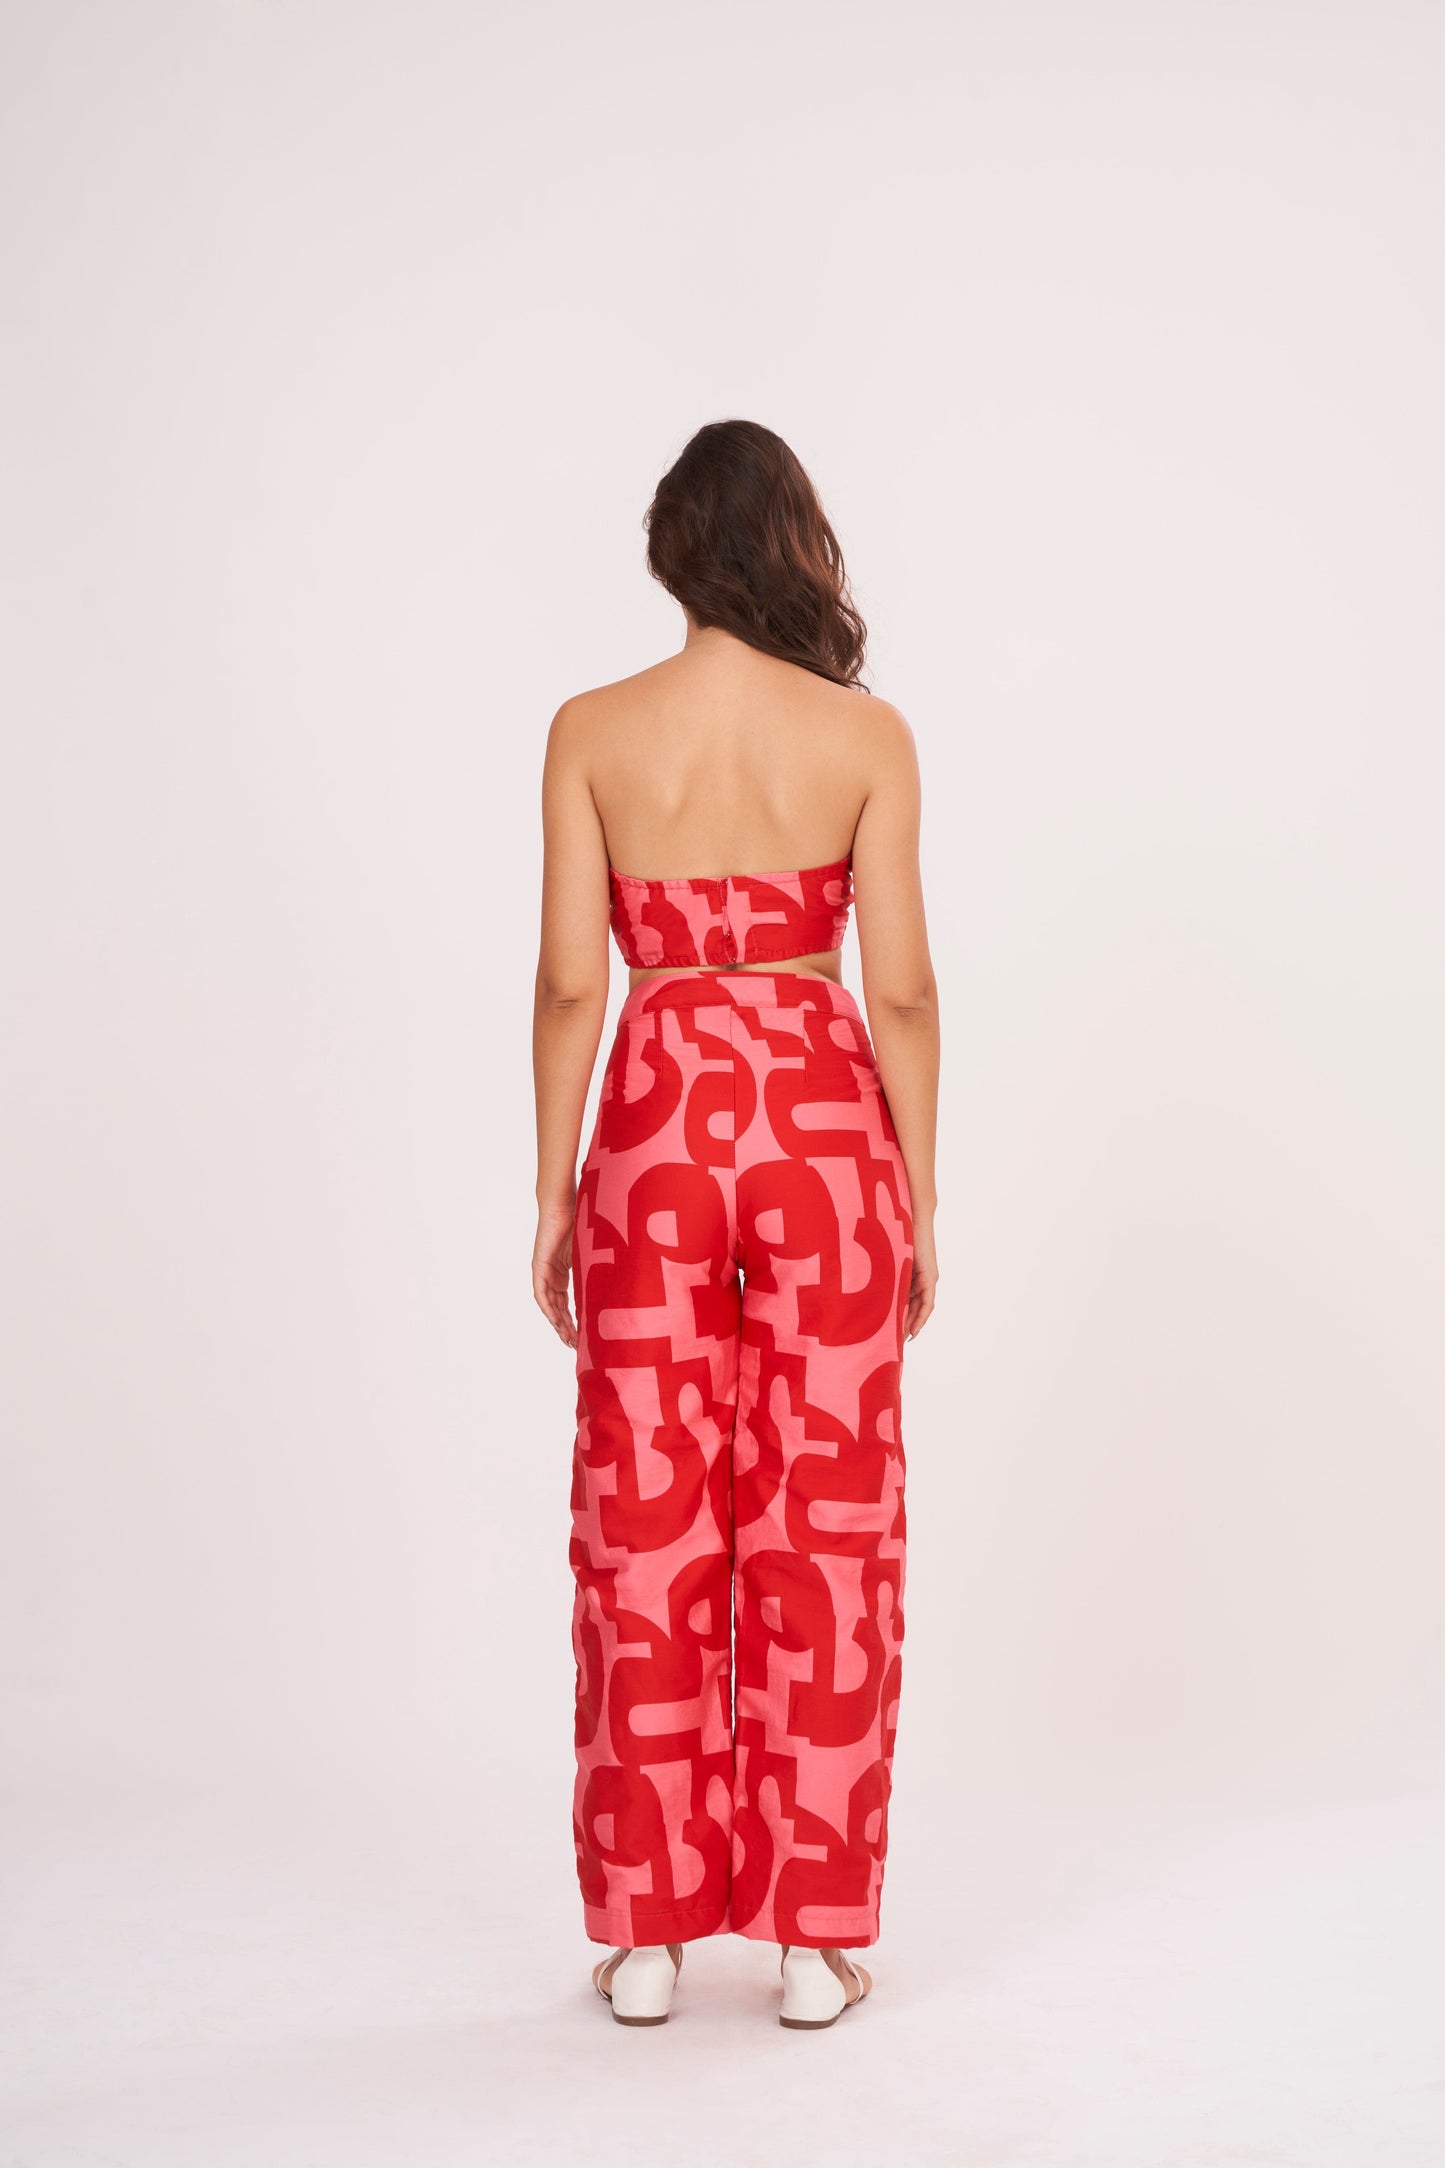 Red Co Ord Set with tube crop top and Palazzo pants, featuring an eye-catching geometric print. Crafted from high-quality, lightweight cotton satin, perfect for summer days.